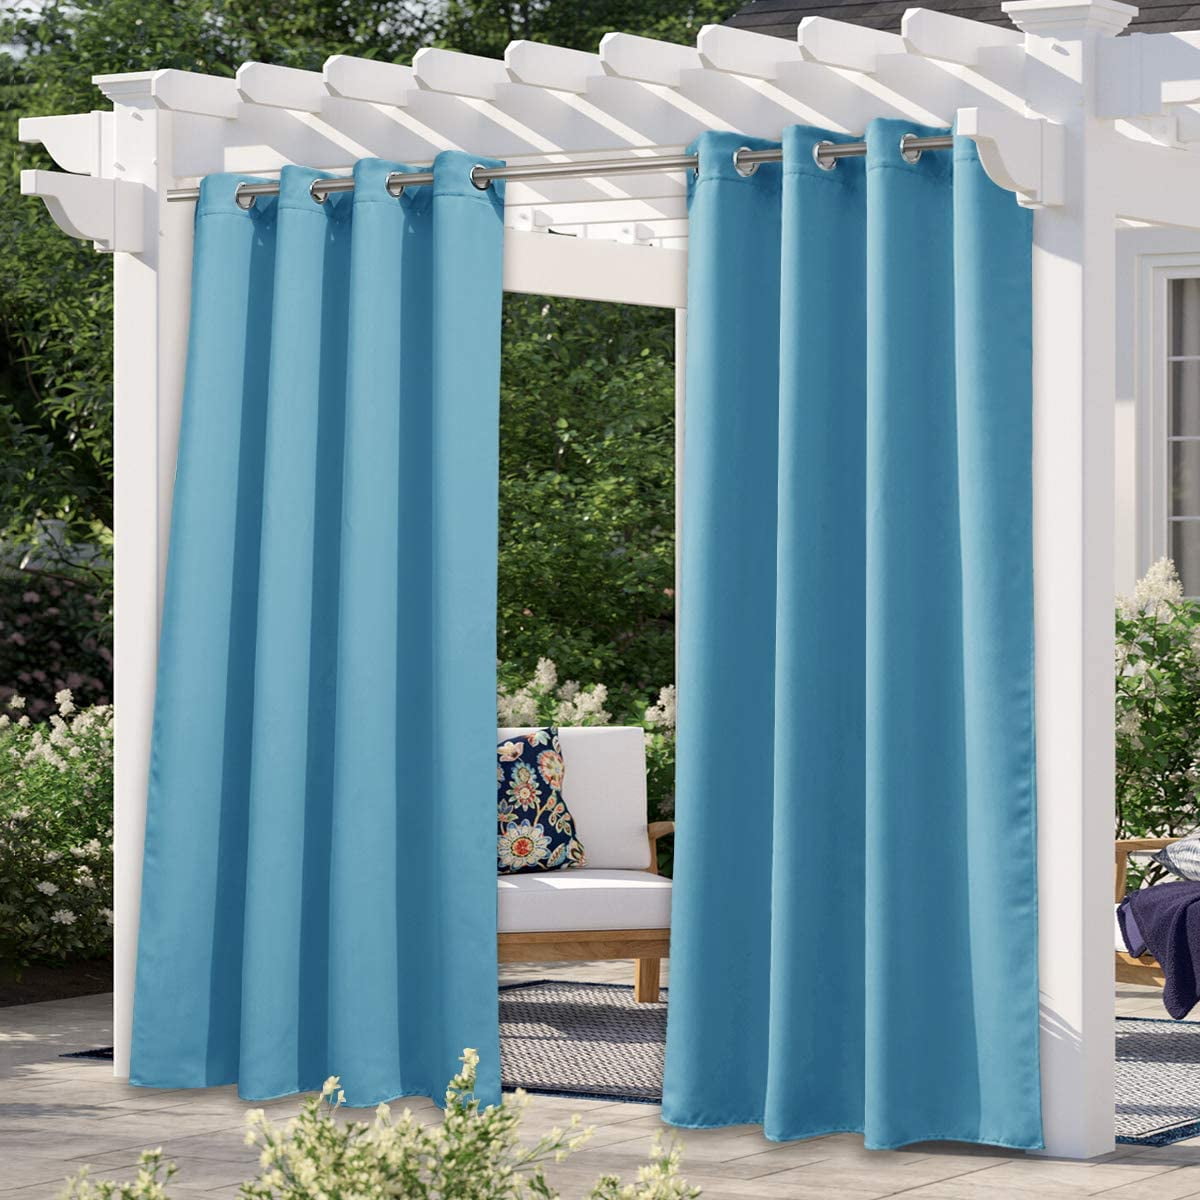 NICETOWN Outdoor Curtain for Patio Waterproof Biscotti Beige Rustproof Grommet Top and Bottom Weighted Outdoor Divider Windproof Thermal Insulated Drape for Balcony / Cabana W100 x L108 1 Panel